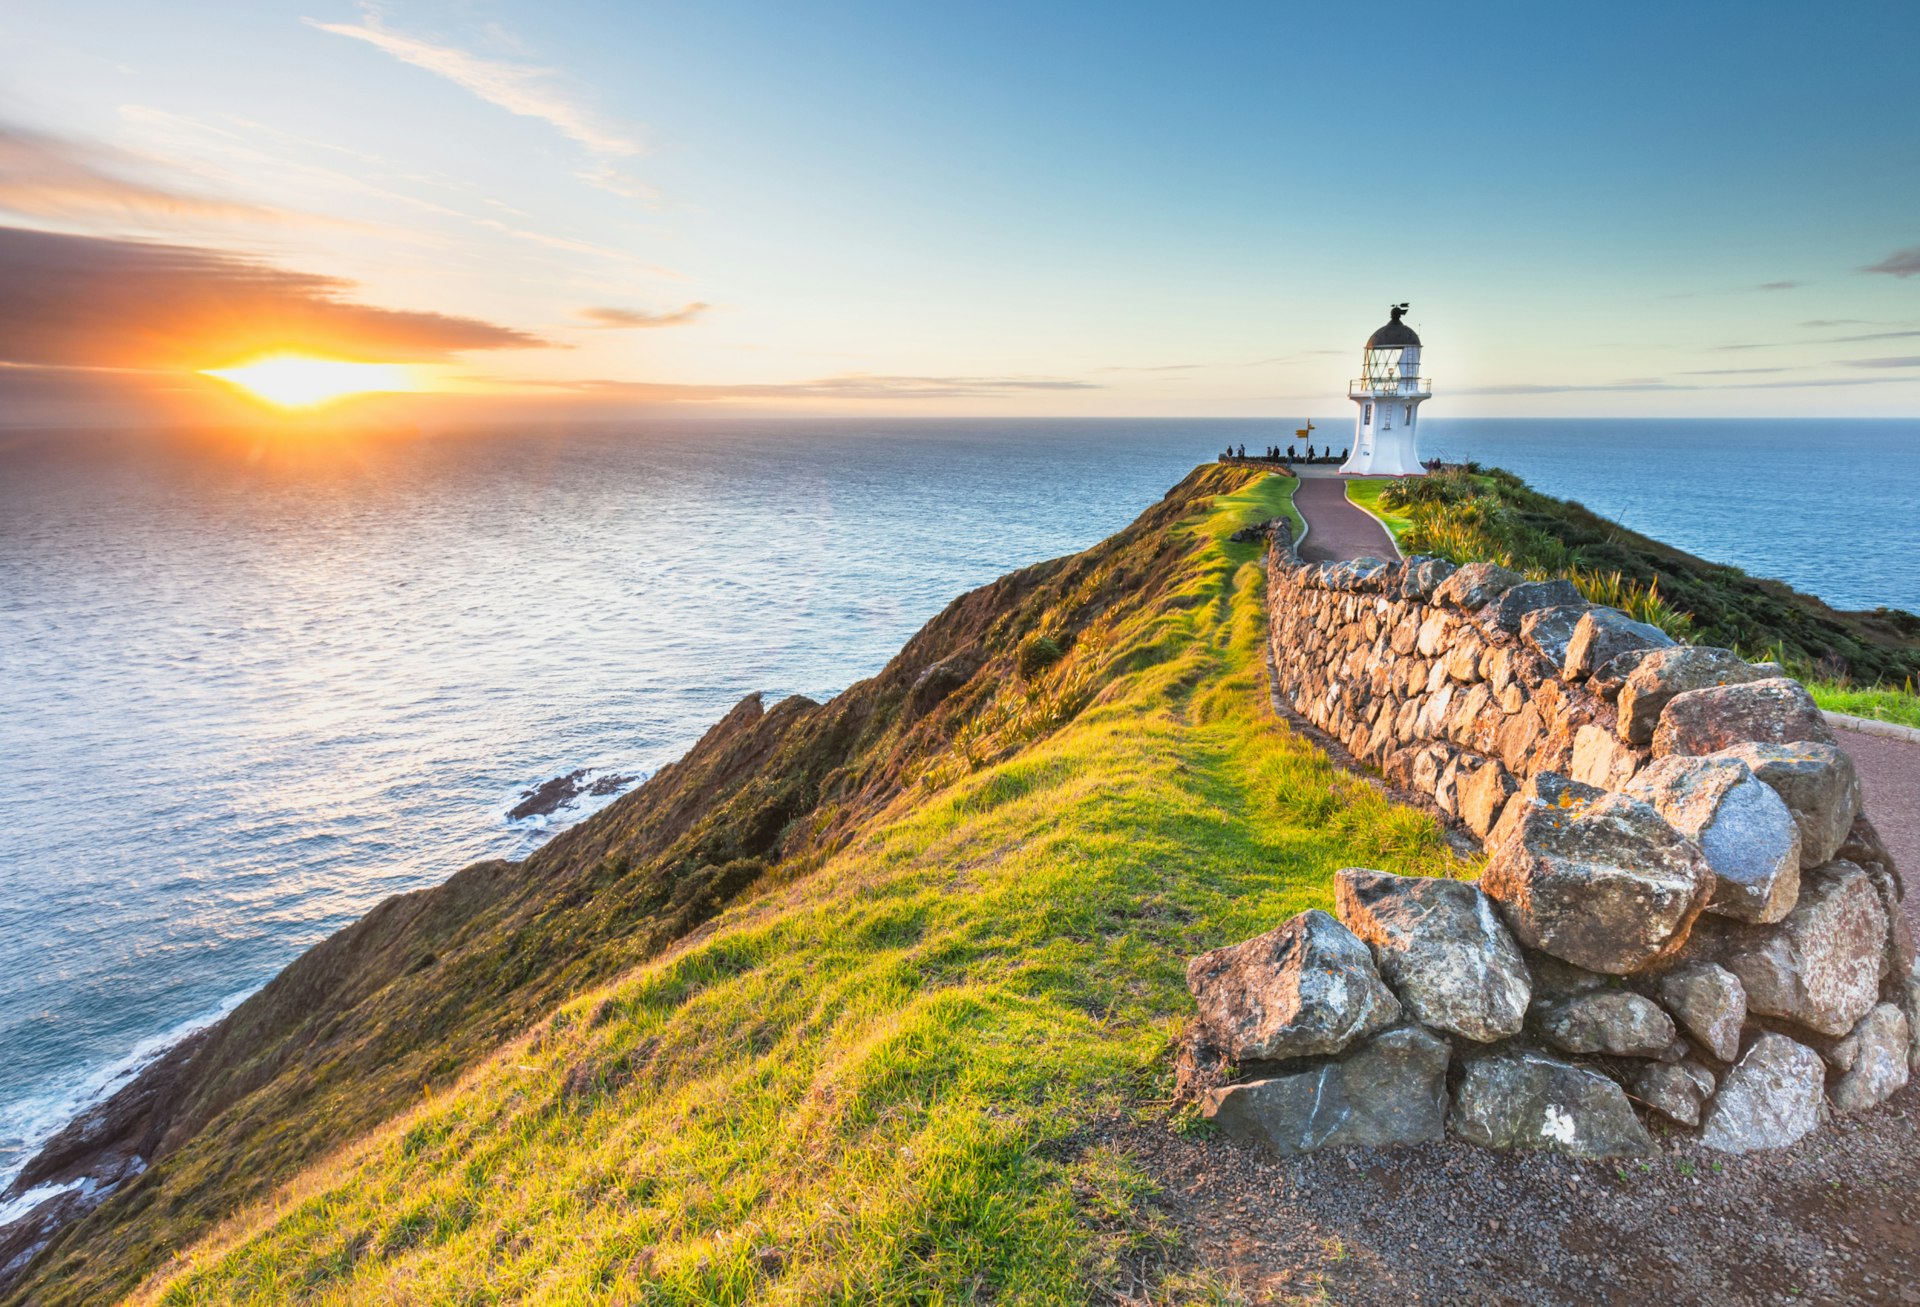 Cape Reinga lighthouse with the sun setting in New Zealand